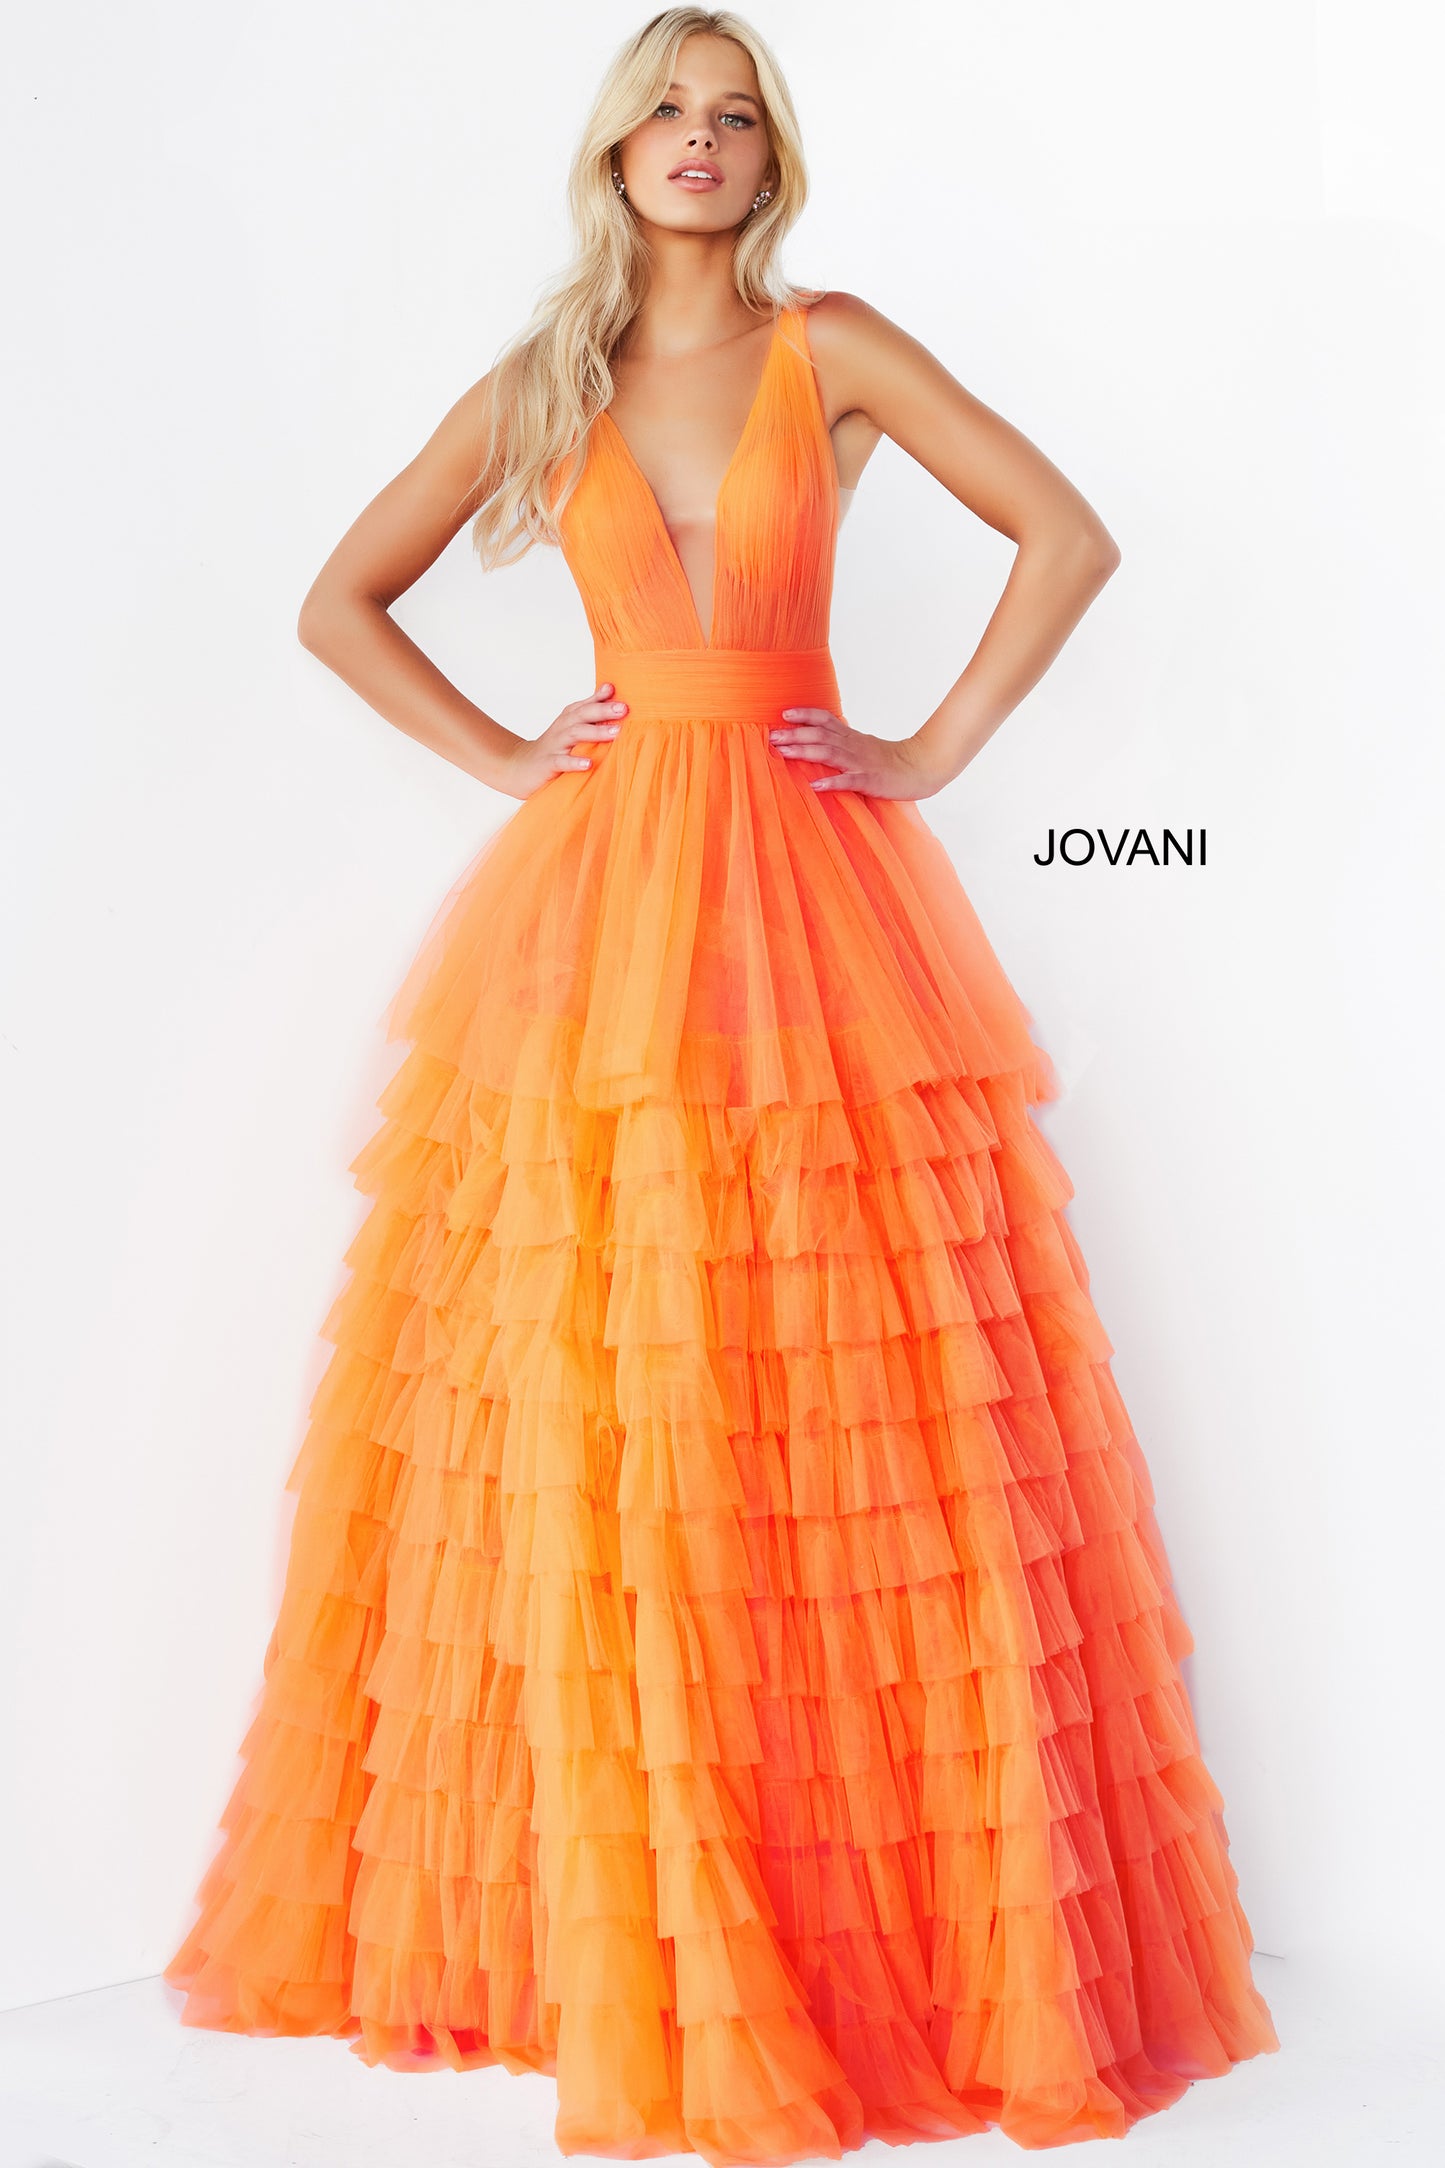 Jovani 07264 Long Ballgown Prom Pageant Gown ruffle dress v neck Floor length A line orange tulle Jovani prom ballgown 07264 features layered skirt and pleated sleeveless bodice with low V neck and open back. Available Size-00-24  Available Color- Orange, Blush, Lilac, White